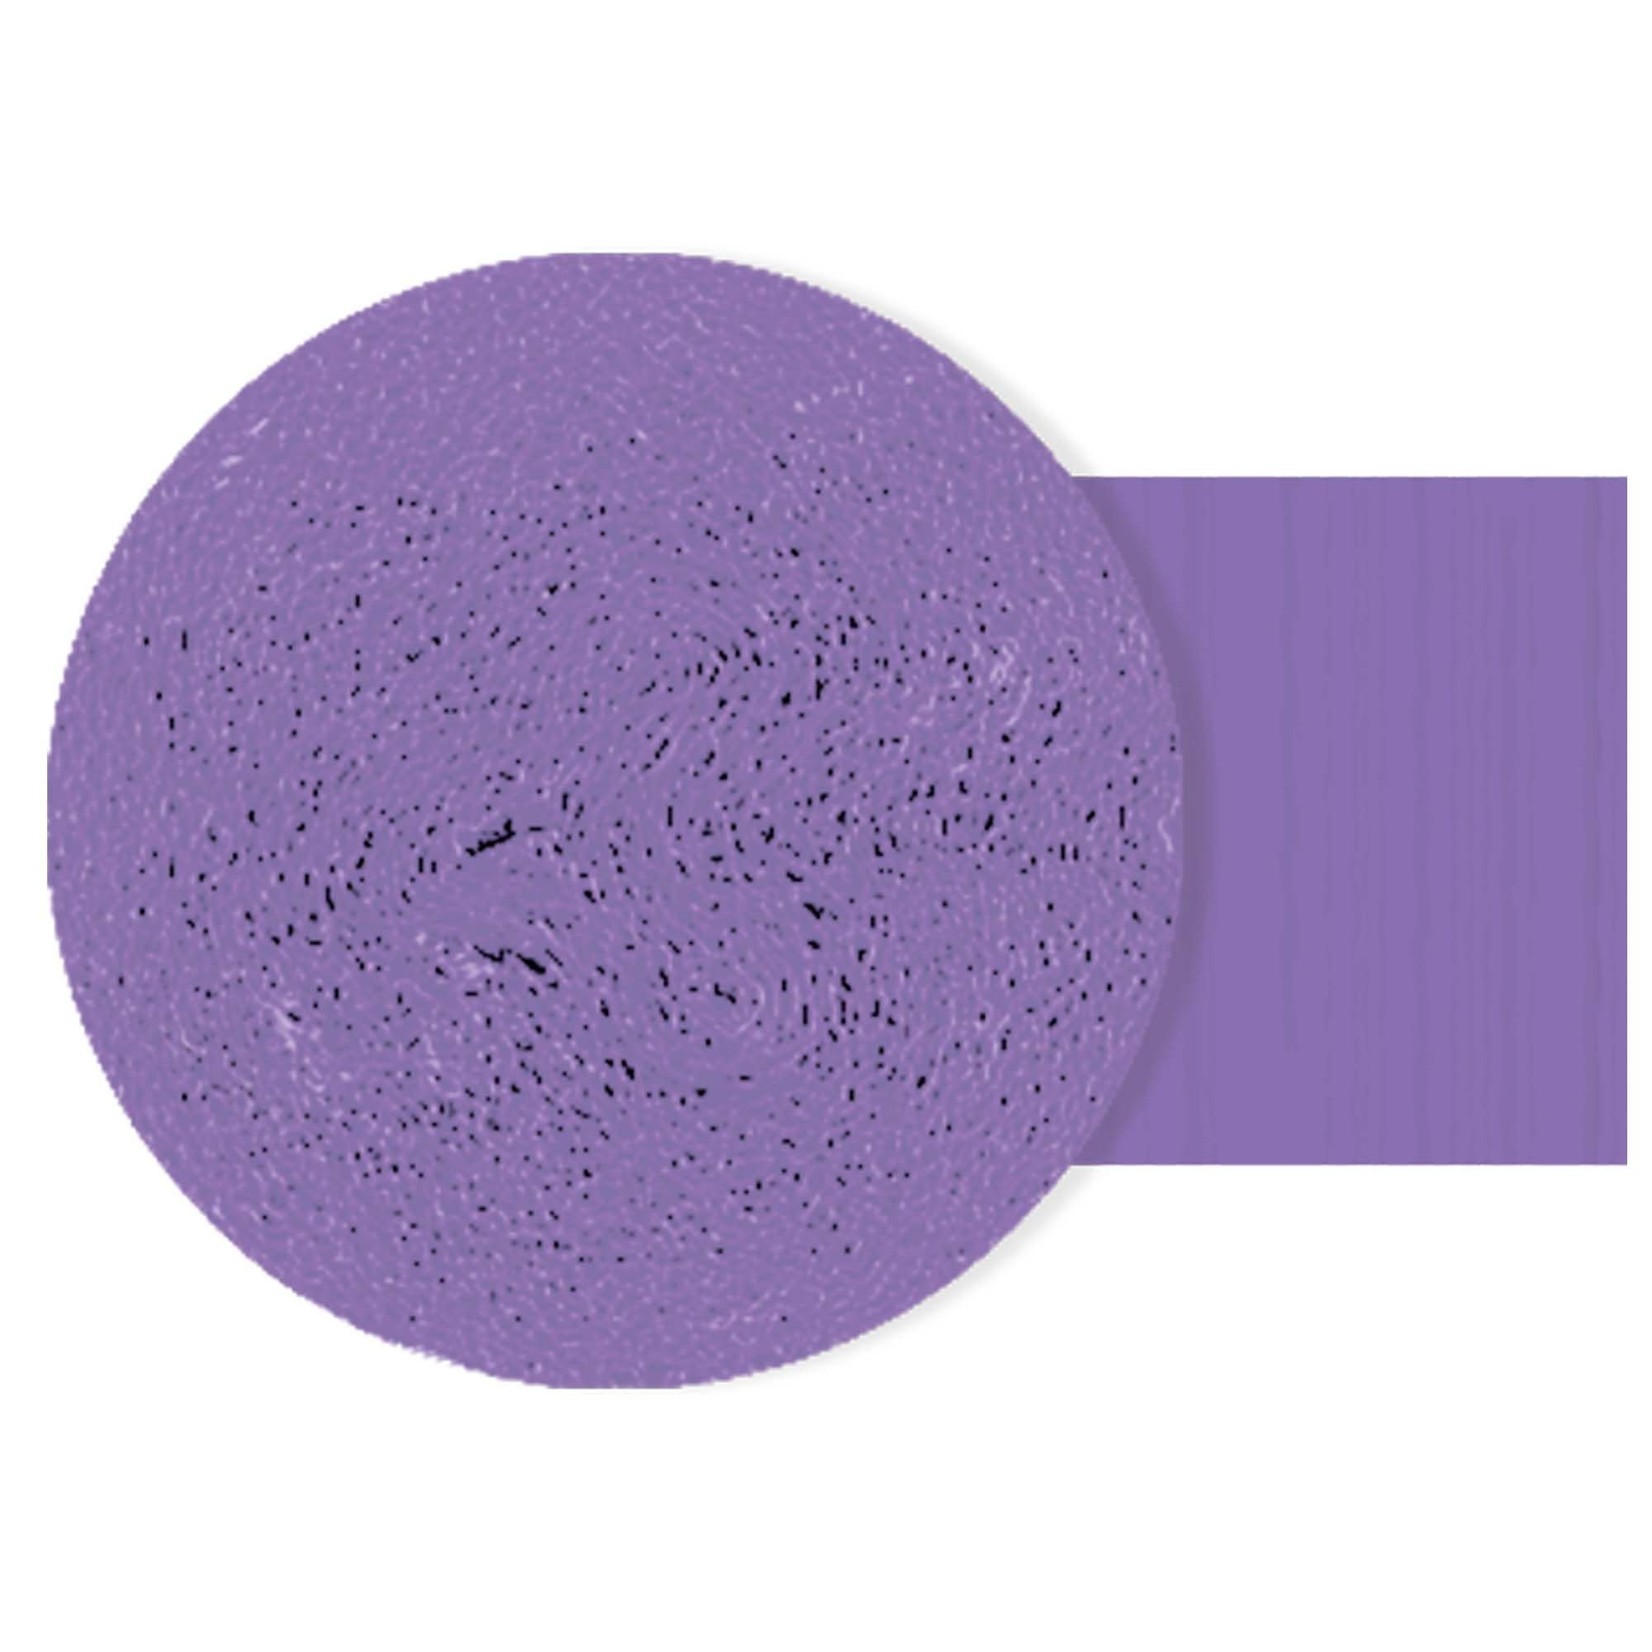 Solid Roll Crepe - New Purple